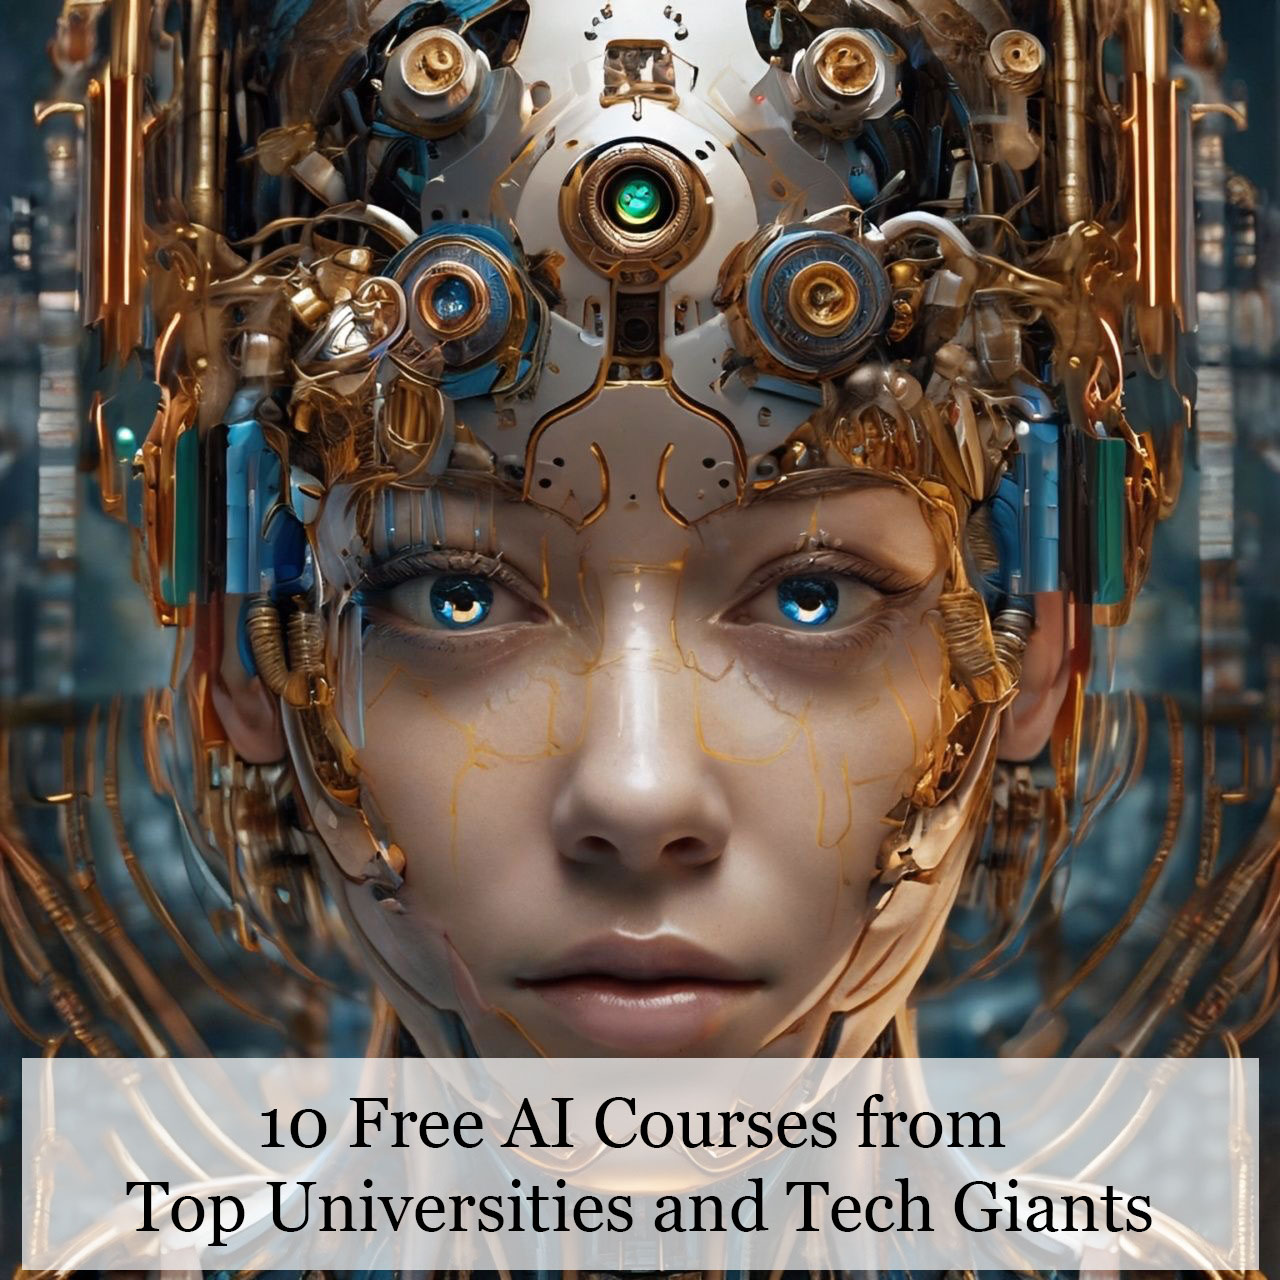 10 Free AI Courses from Top Universities and Tech Giants